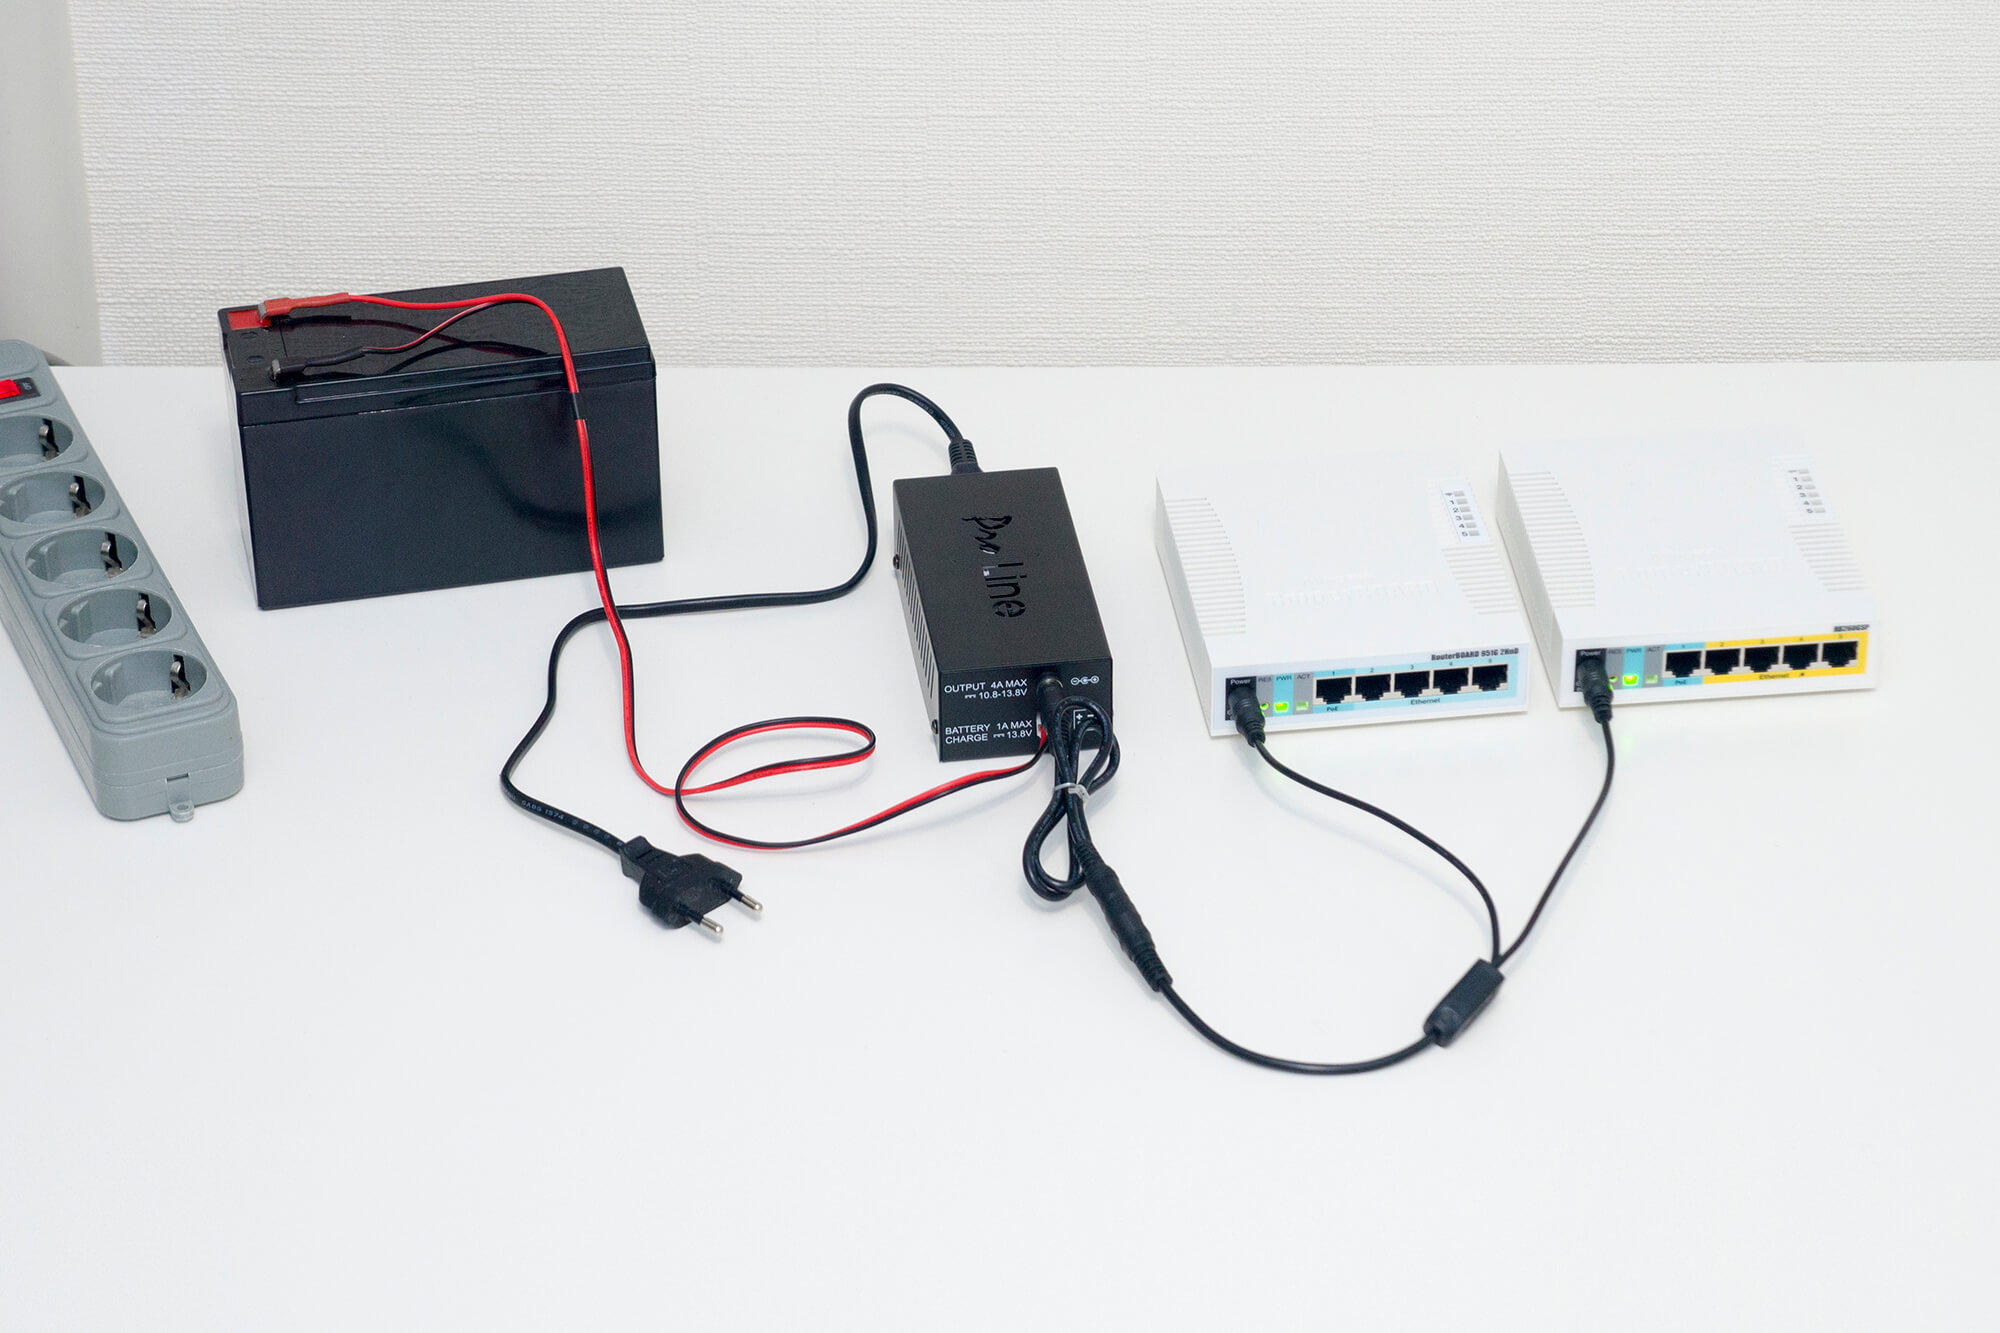 Use DC splitter 1x2 to power router and switch by DC UPS 60W